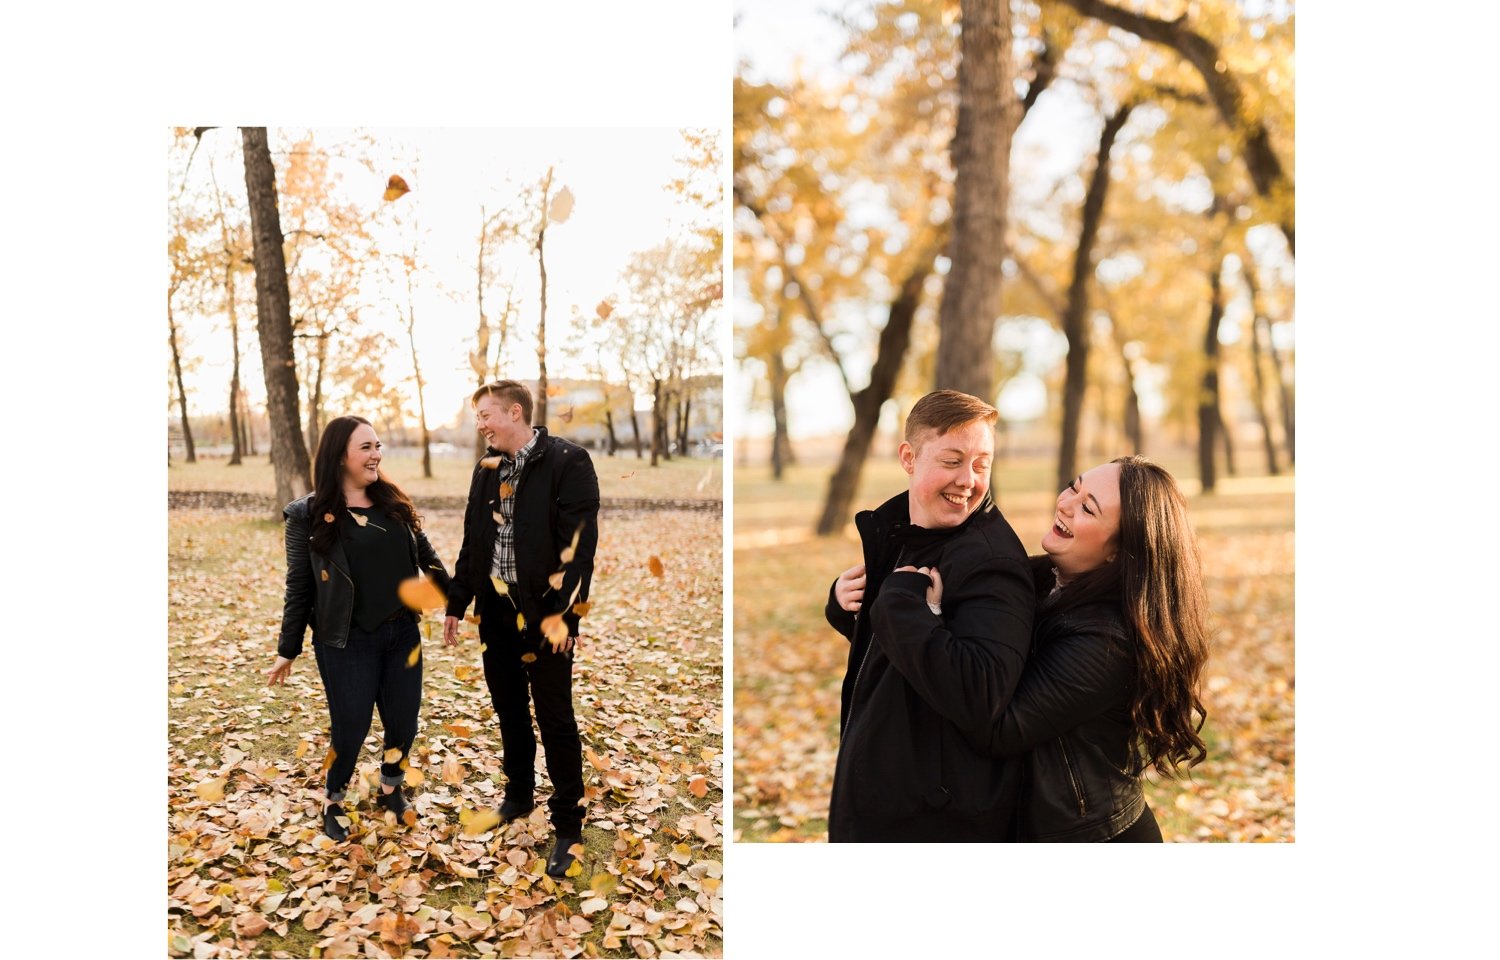 28_2018 29490_2018 37438_sunlight_landscape_trees_couple_engagement_close_Calgary_delicate_cuddle_kiss_golden_nature_intimate_fiancee_autumn_soft_simple_hour_bride_Alberta_photographer_forest_groom_outdoor.jpg